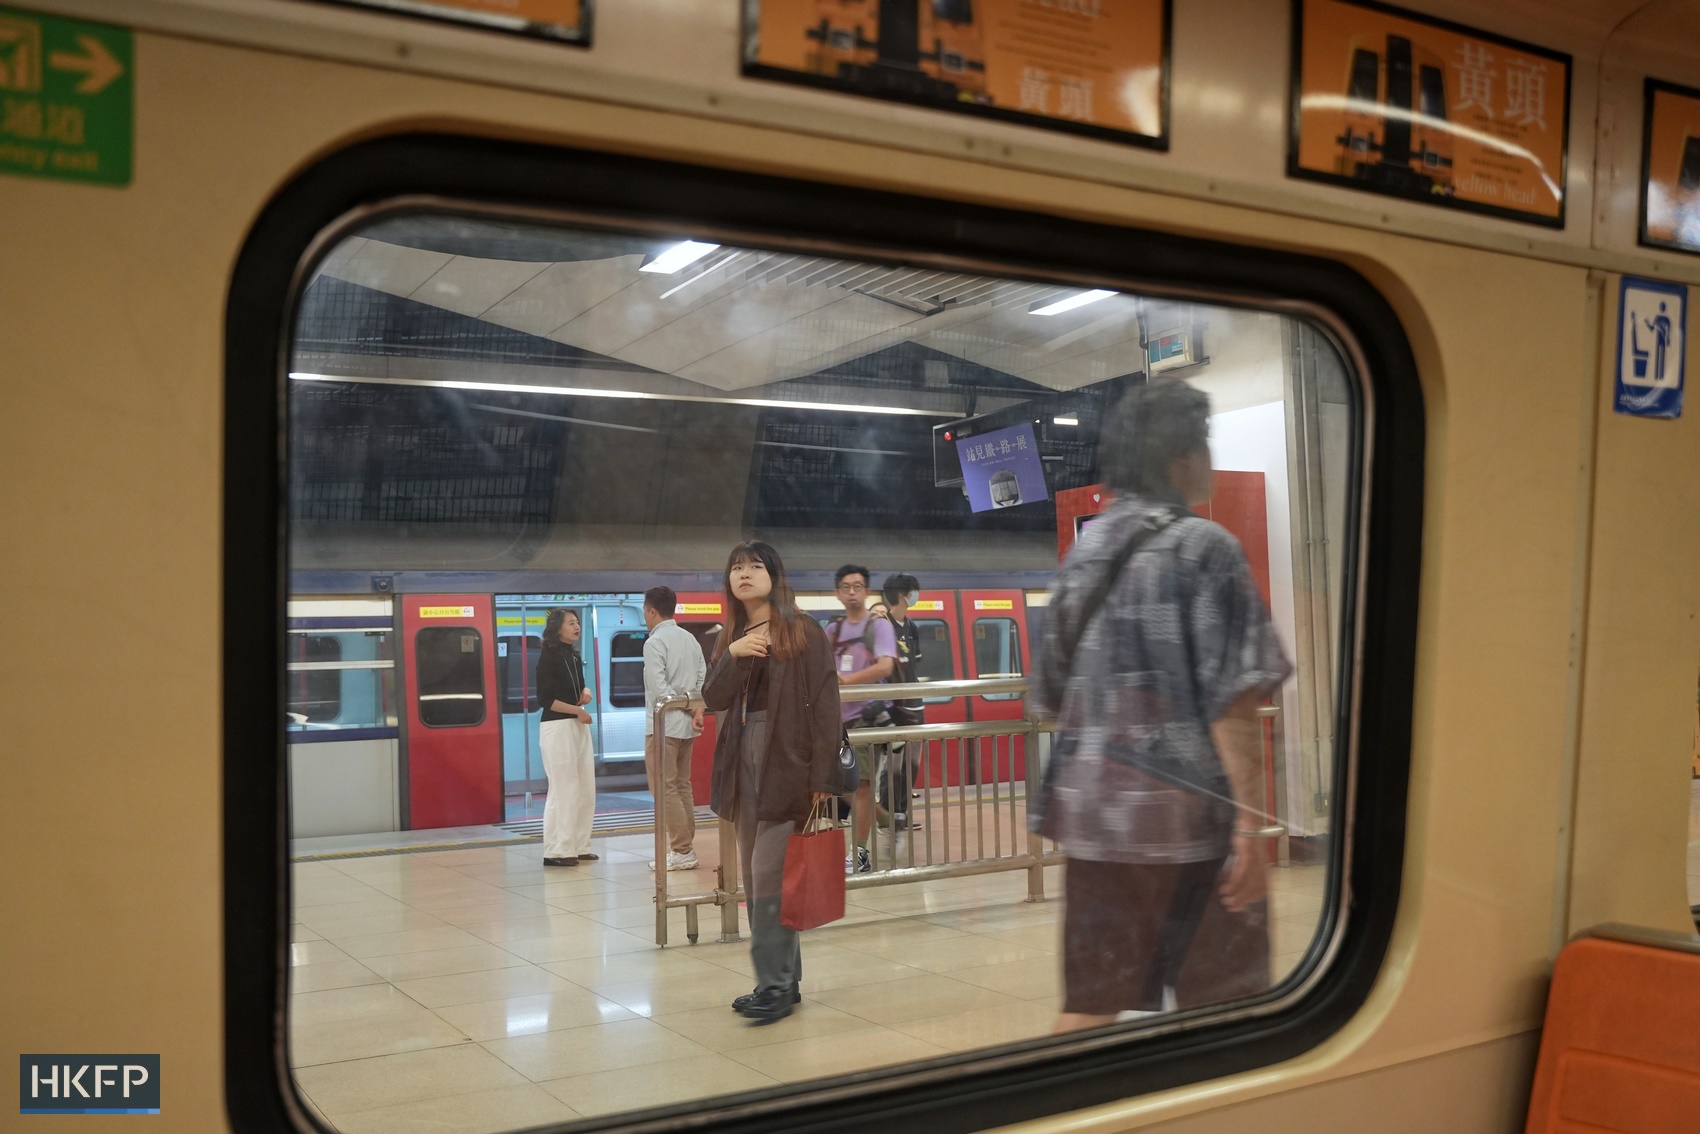 The MTR Corporation launches an exhibition, “Station Rail Voyage,” which unveils retired trains and over a hundred of railway artifacts at Hung Hom Station.